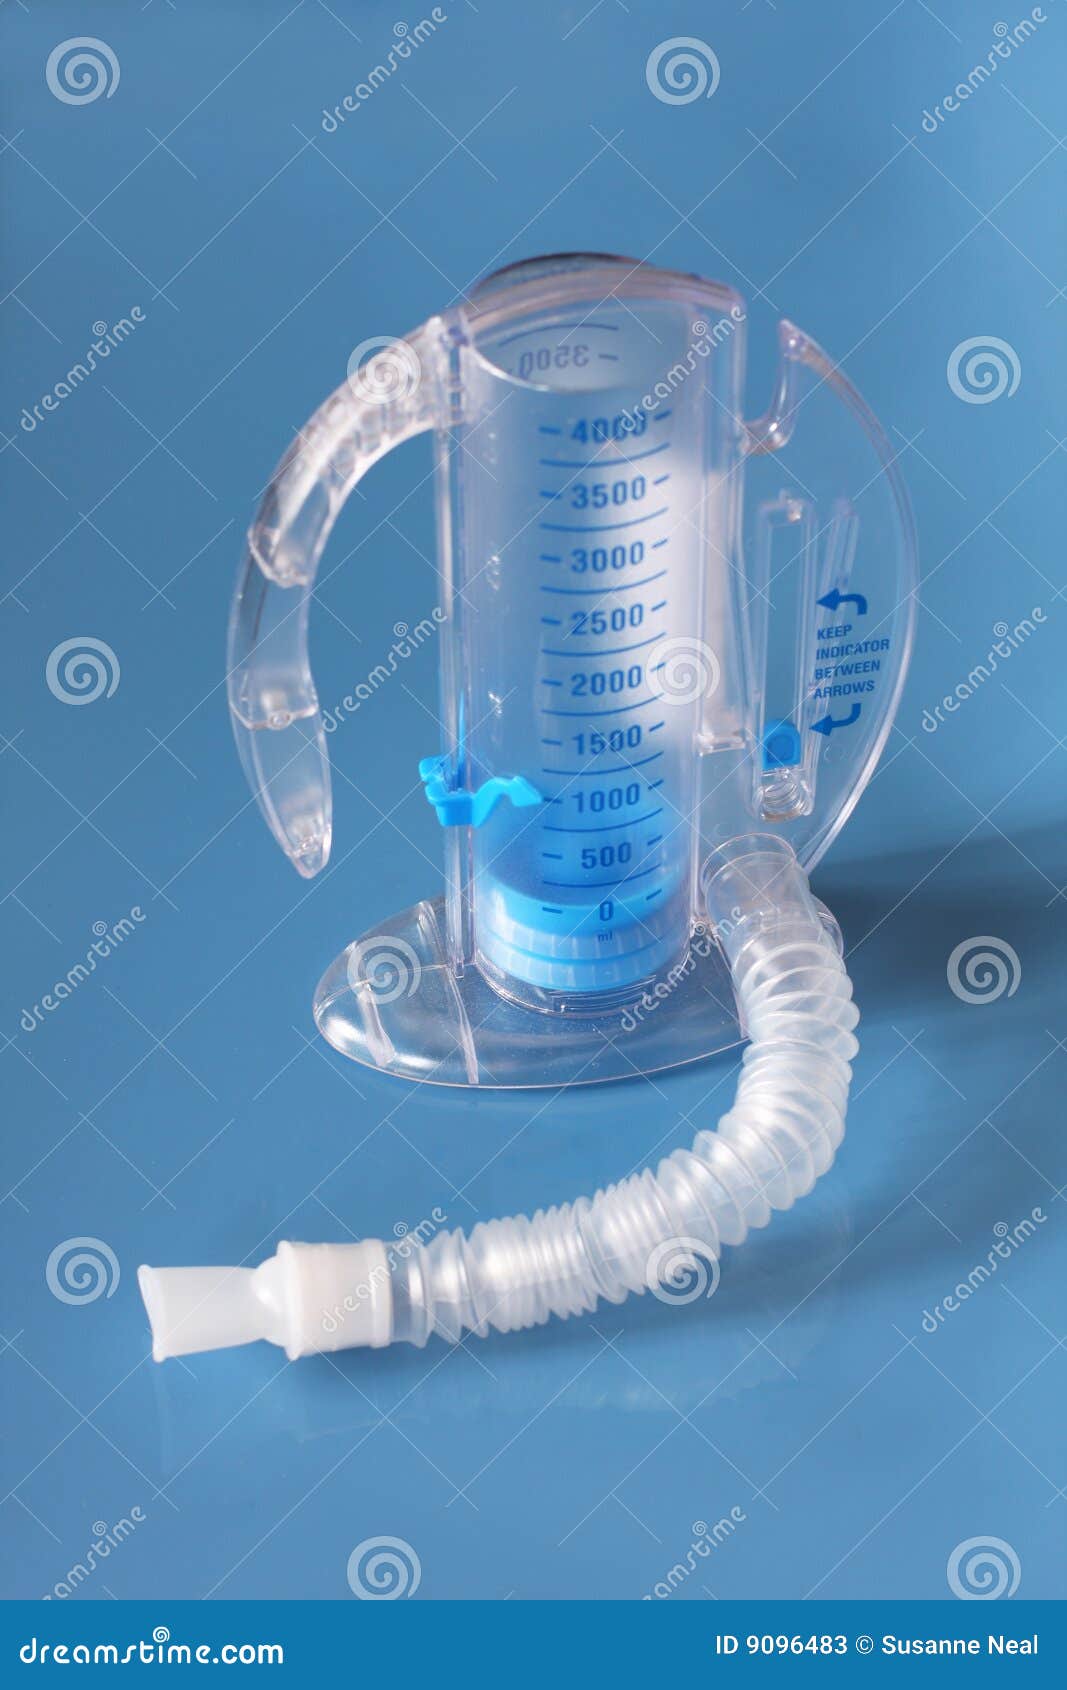 incentive spirometer for breathing